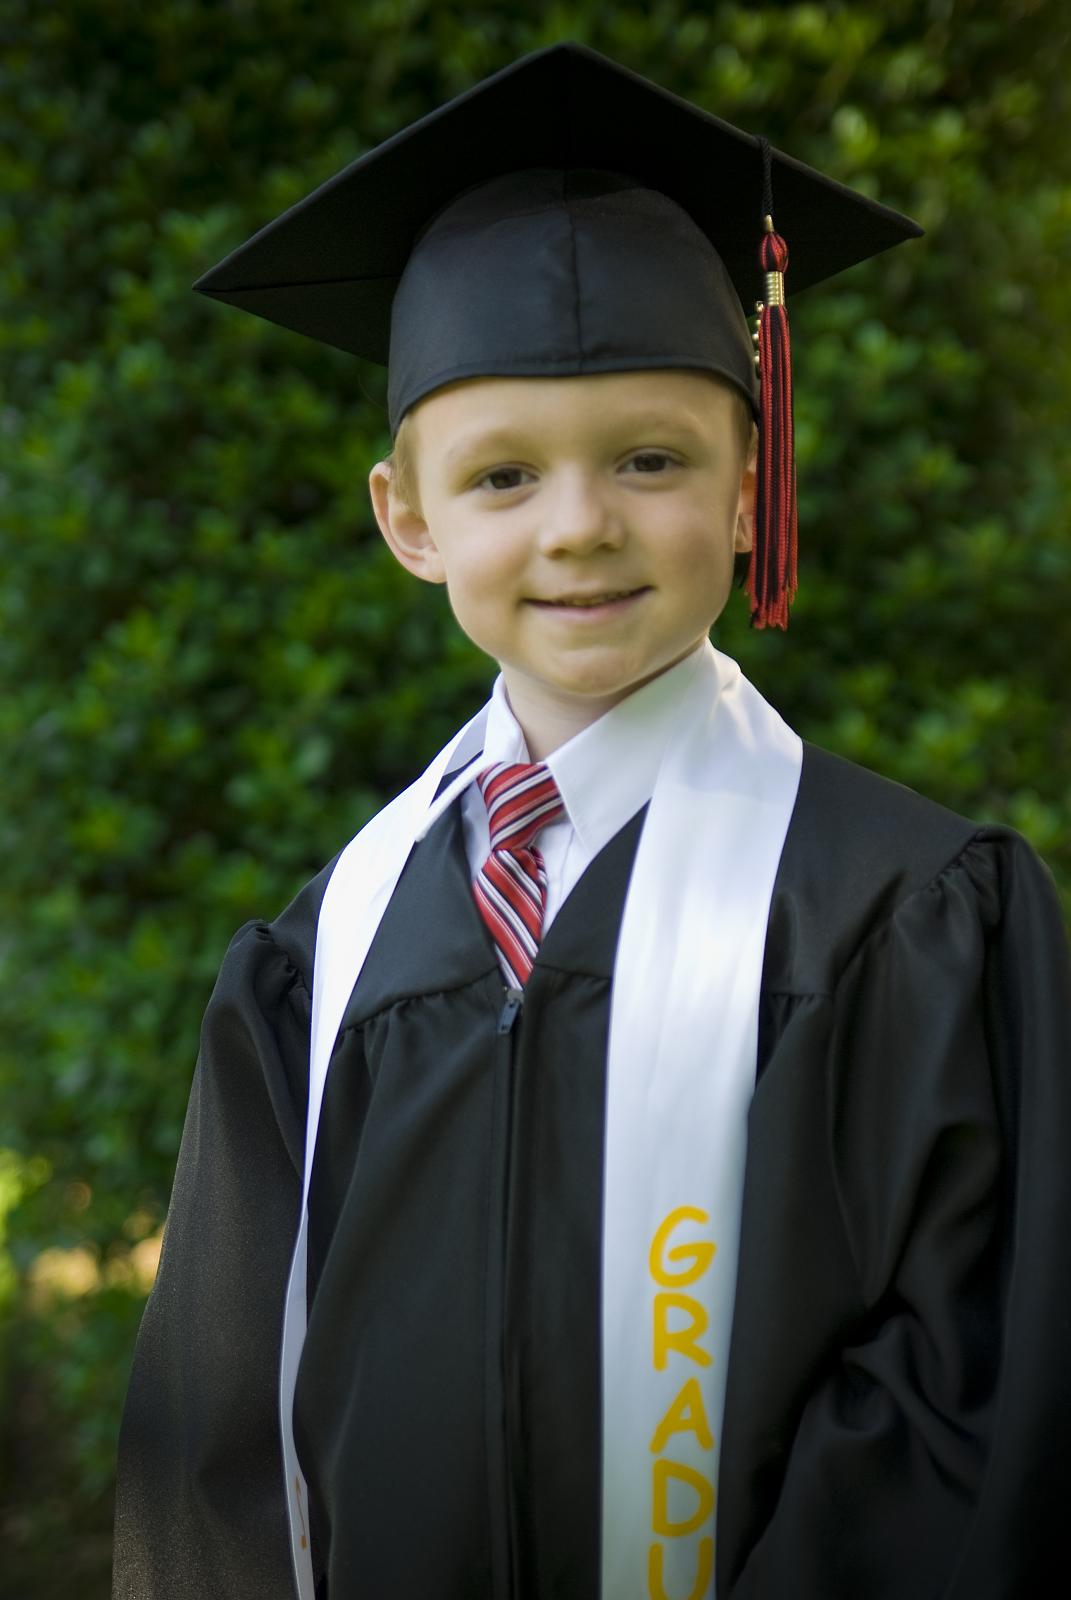 a little boy in a graduation gown and cap and tie